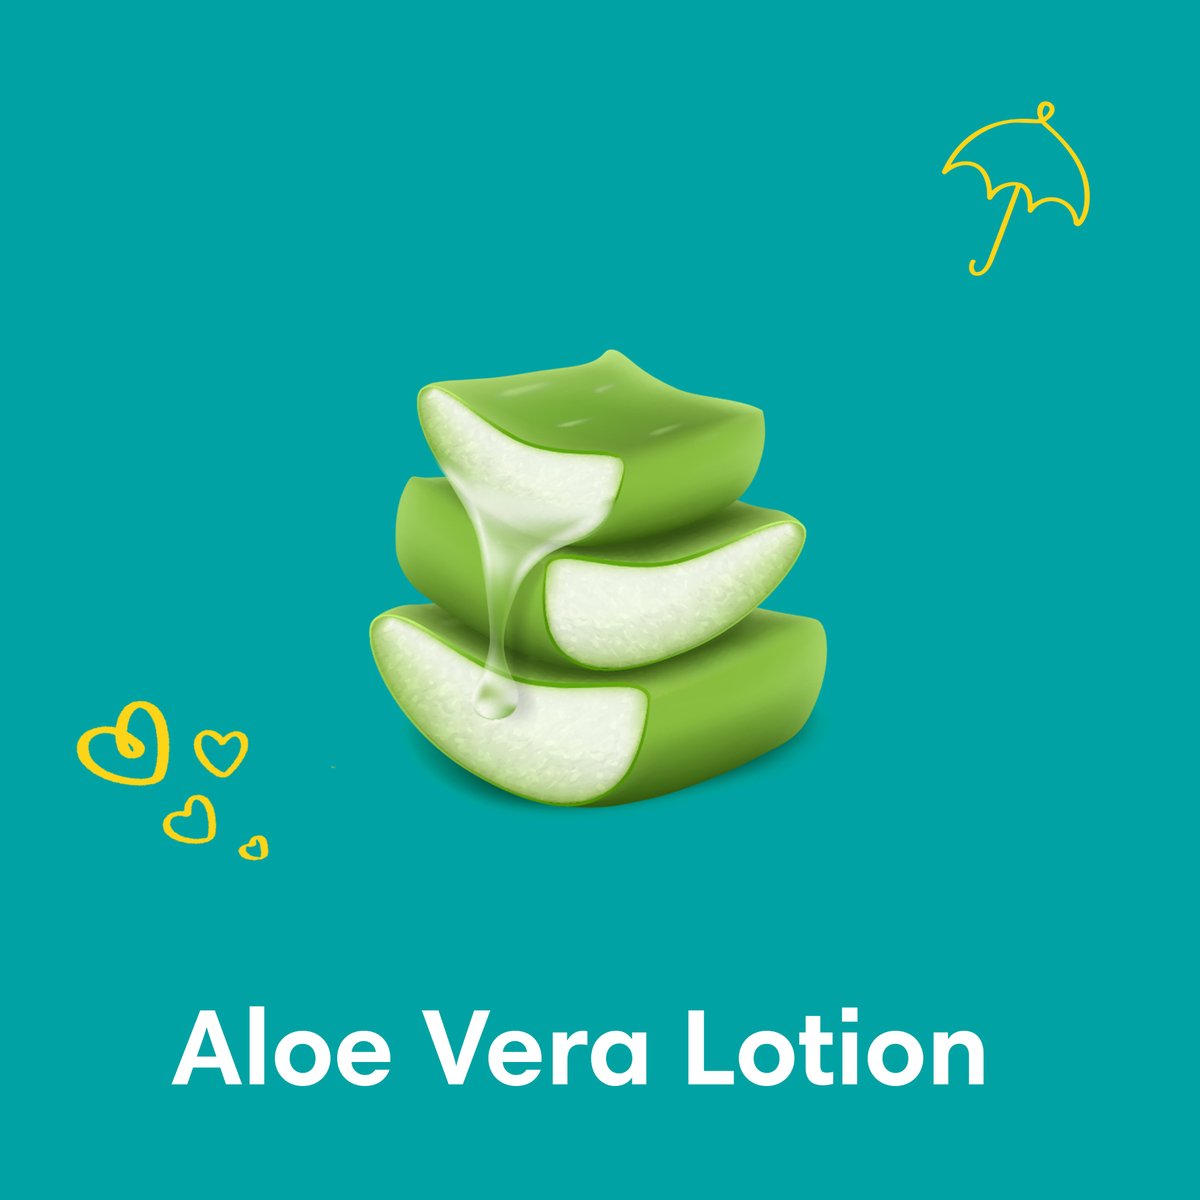 Pampers Baby-Dry Taped Diapers with Aloe Vera Lotion, up to 100% Leakage Protection, Size 3, 6-10kg, 17 pcs